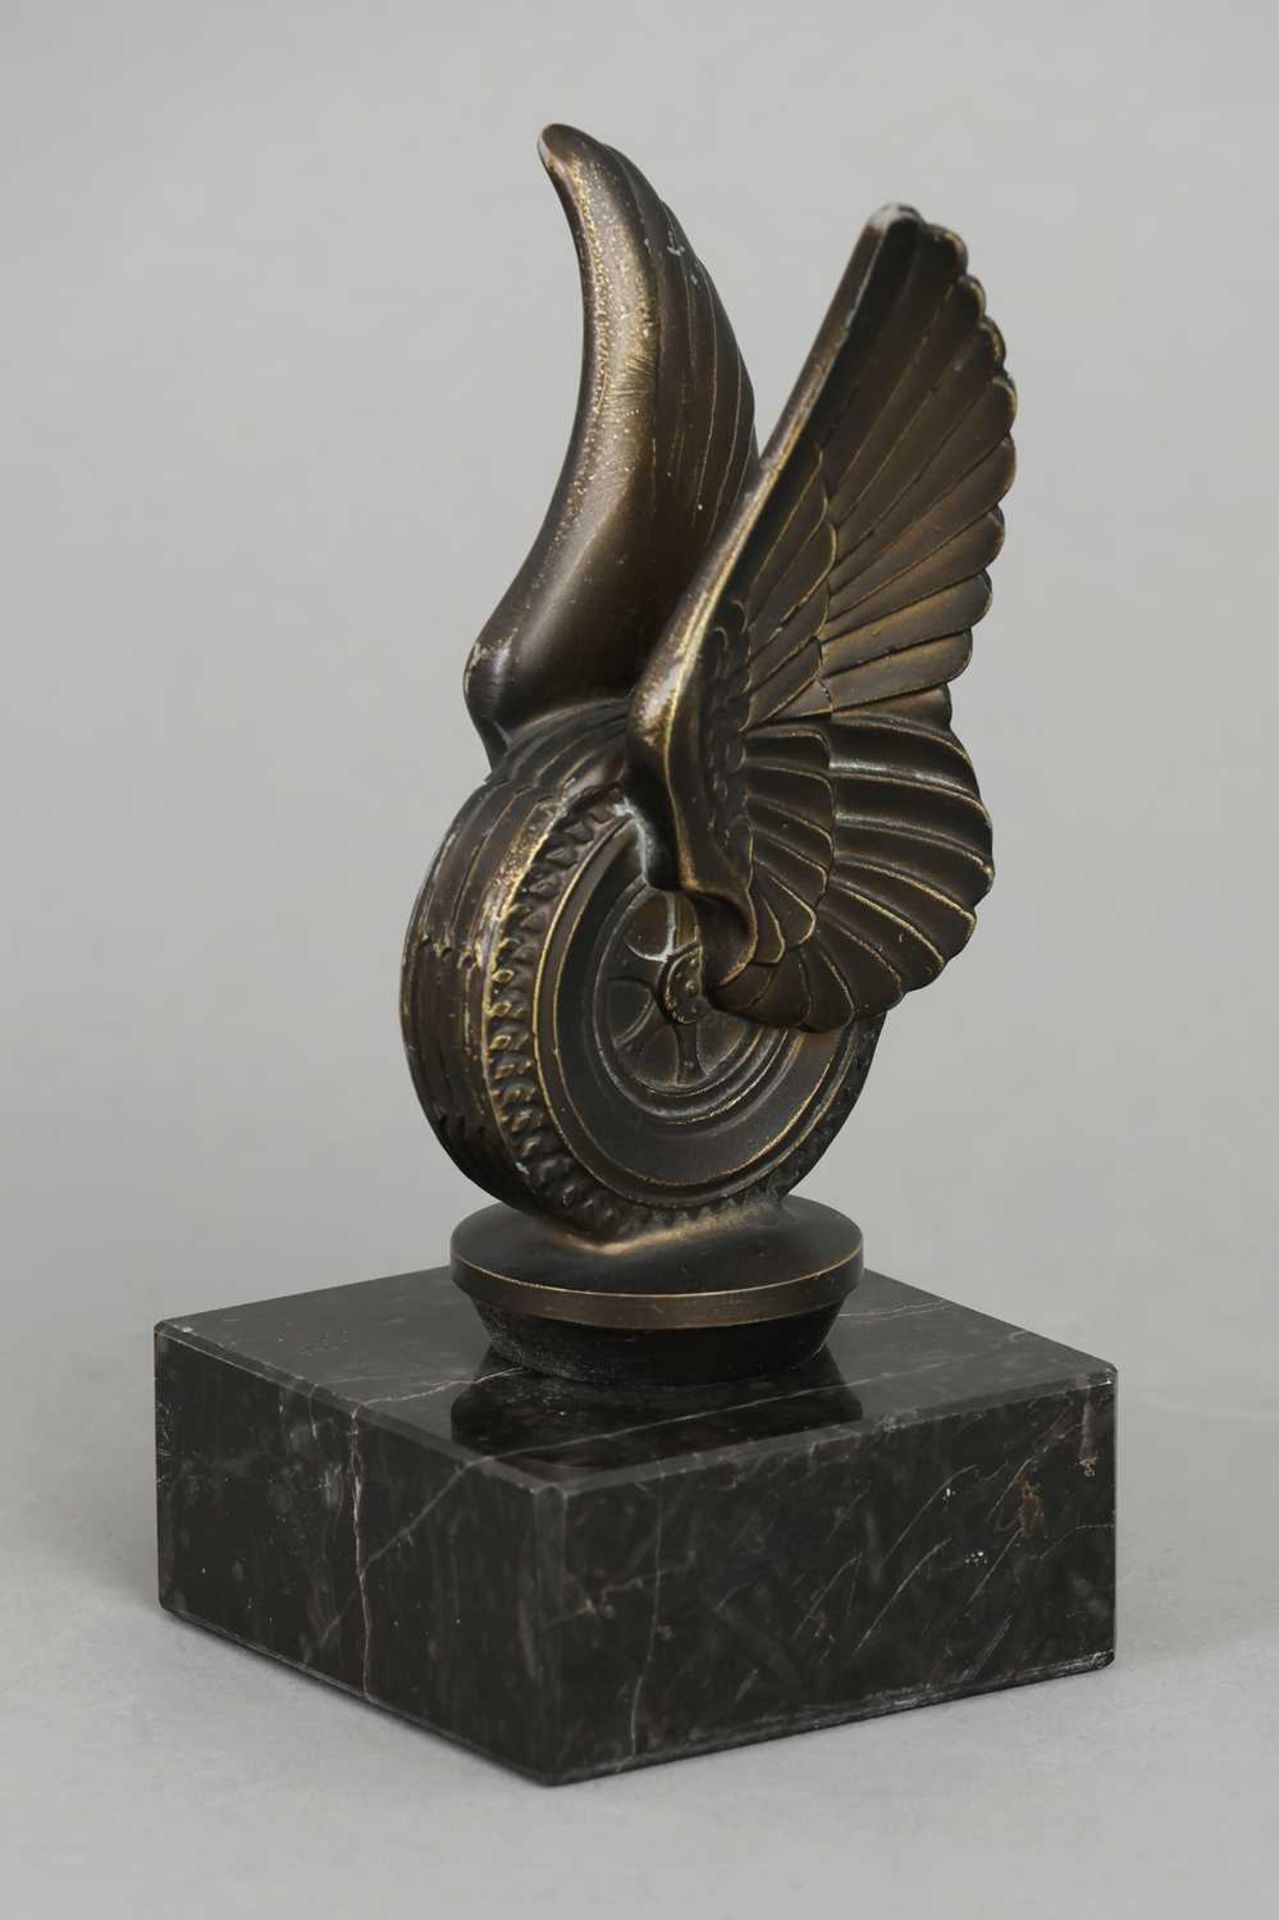 Automobilia Paperweight "Winged Wheel"